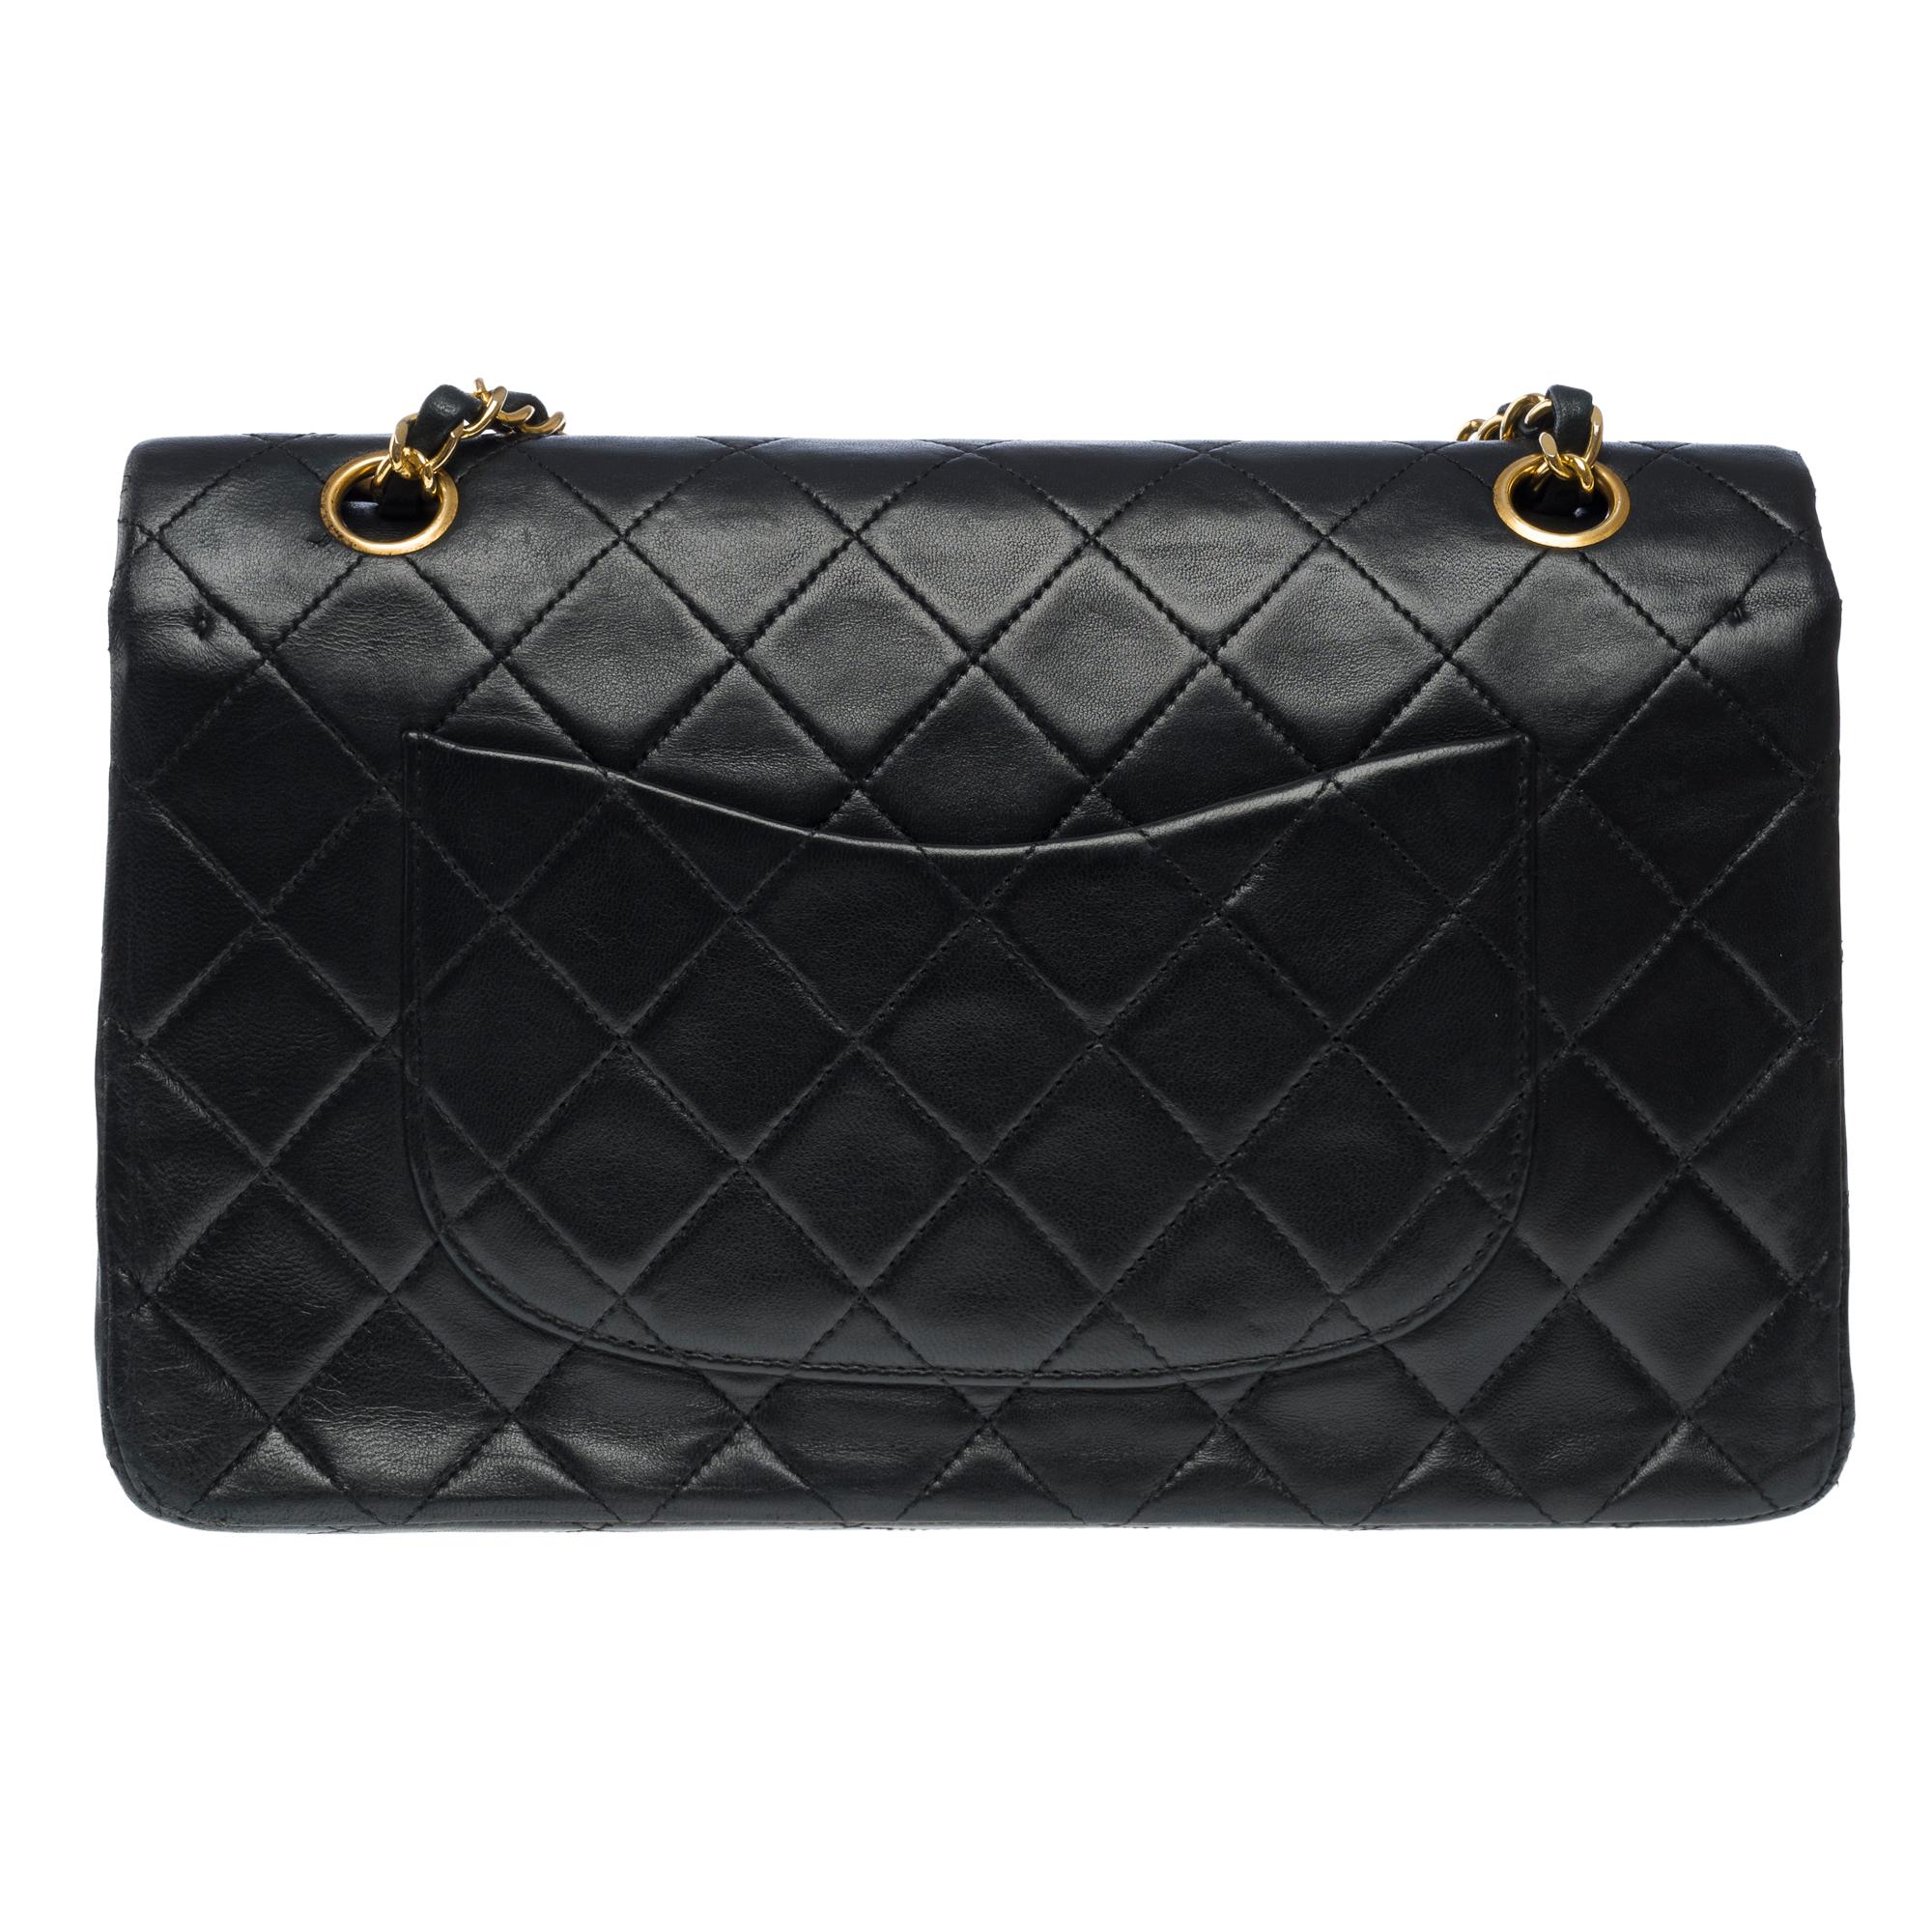 Women's Chanel Timeless double flap shoulder bag in black quilted lambskin leather, GHW For Sale